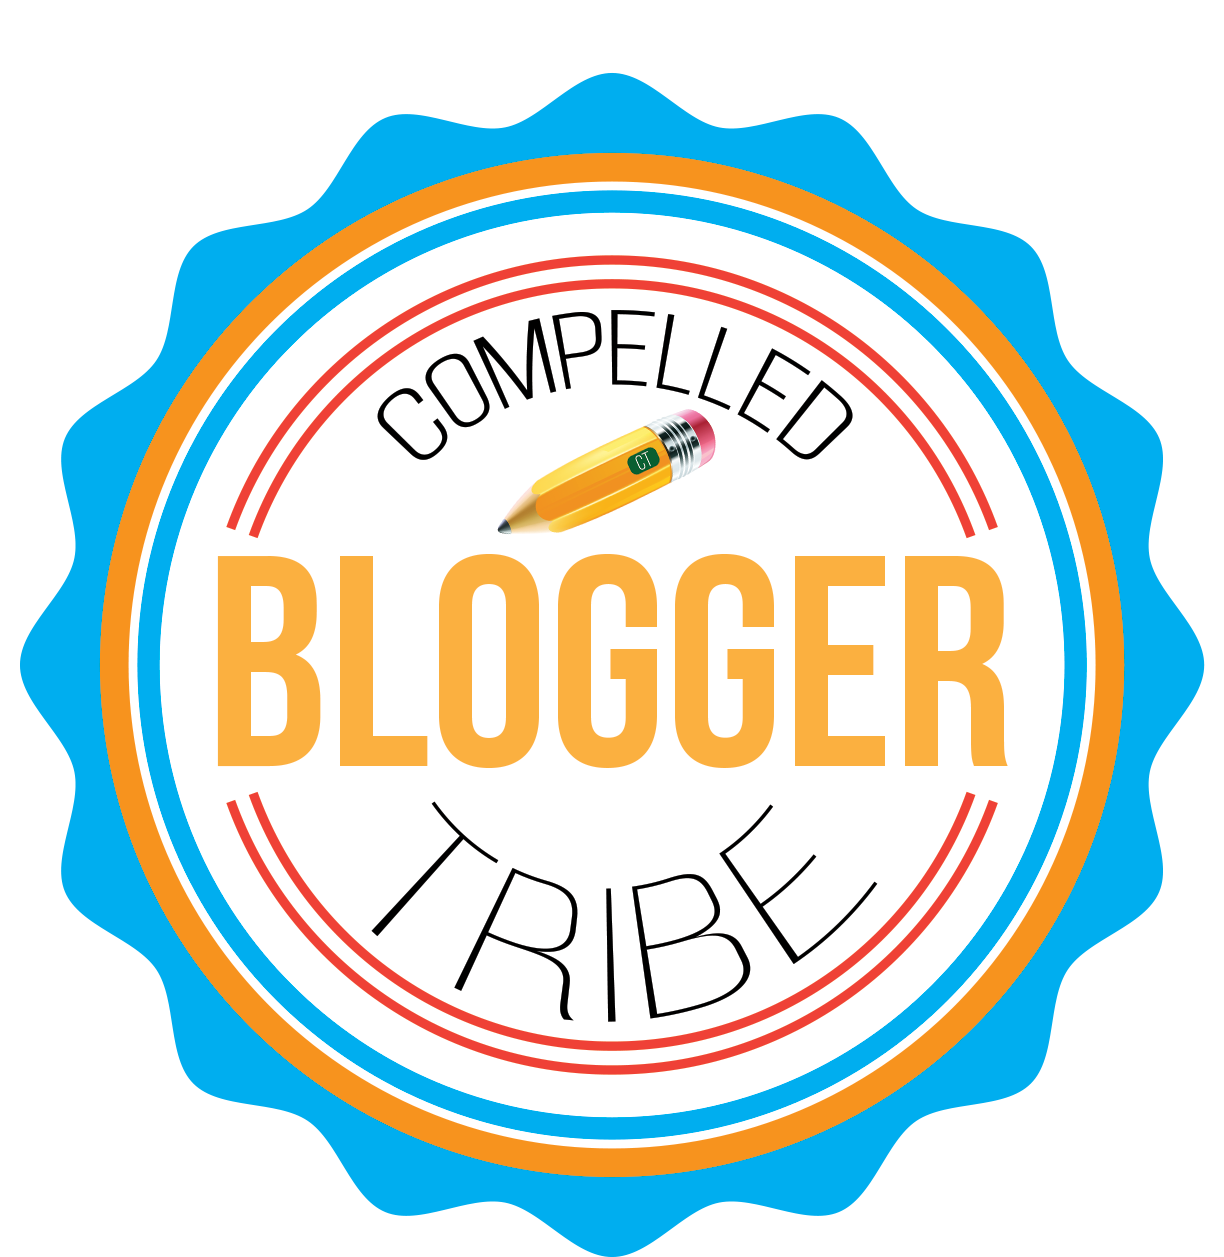 Compelled Tribe Blogger